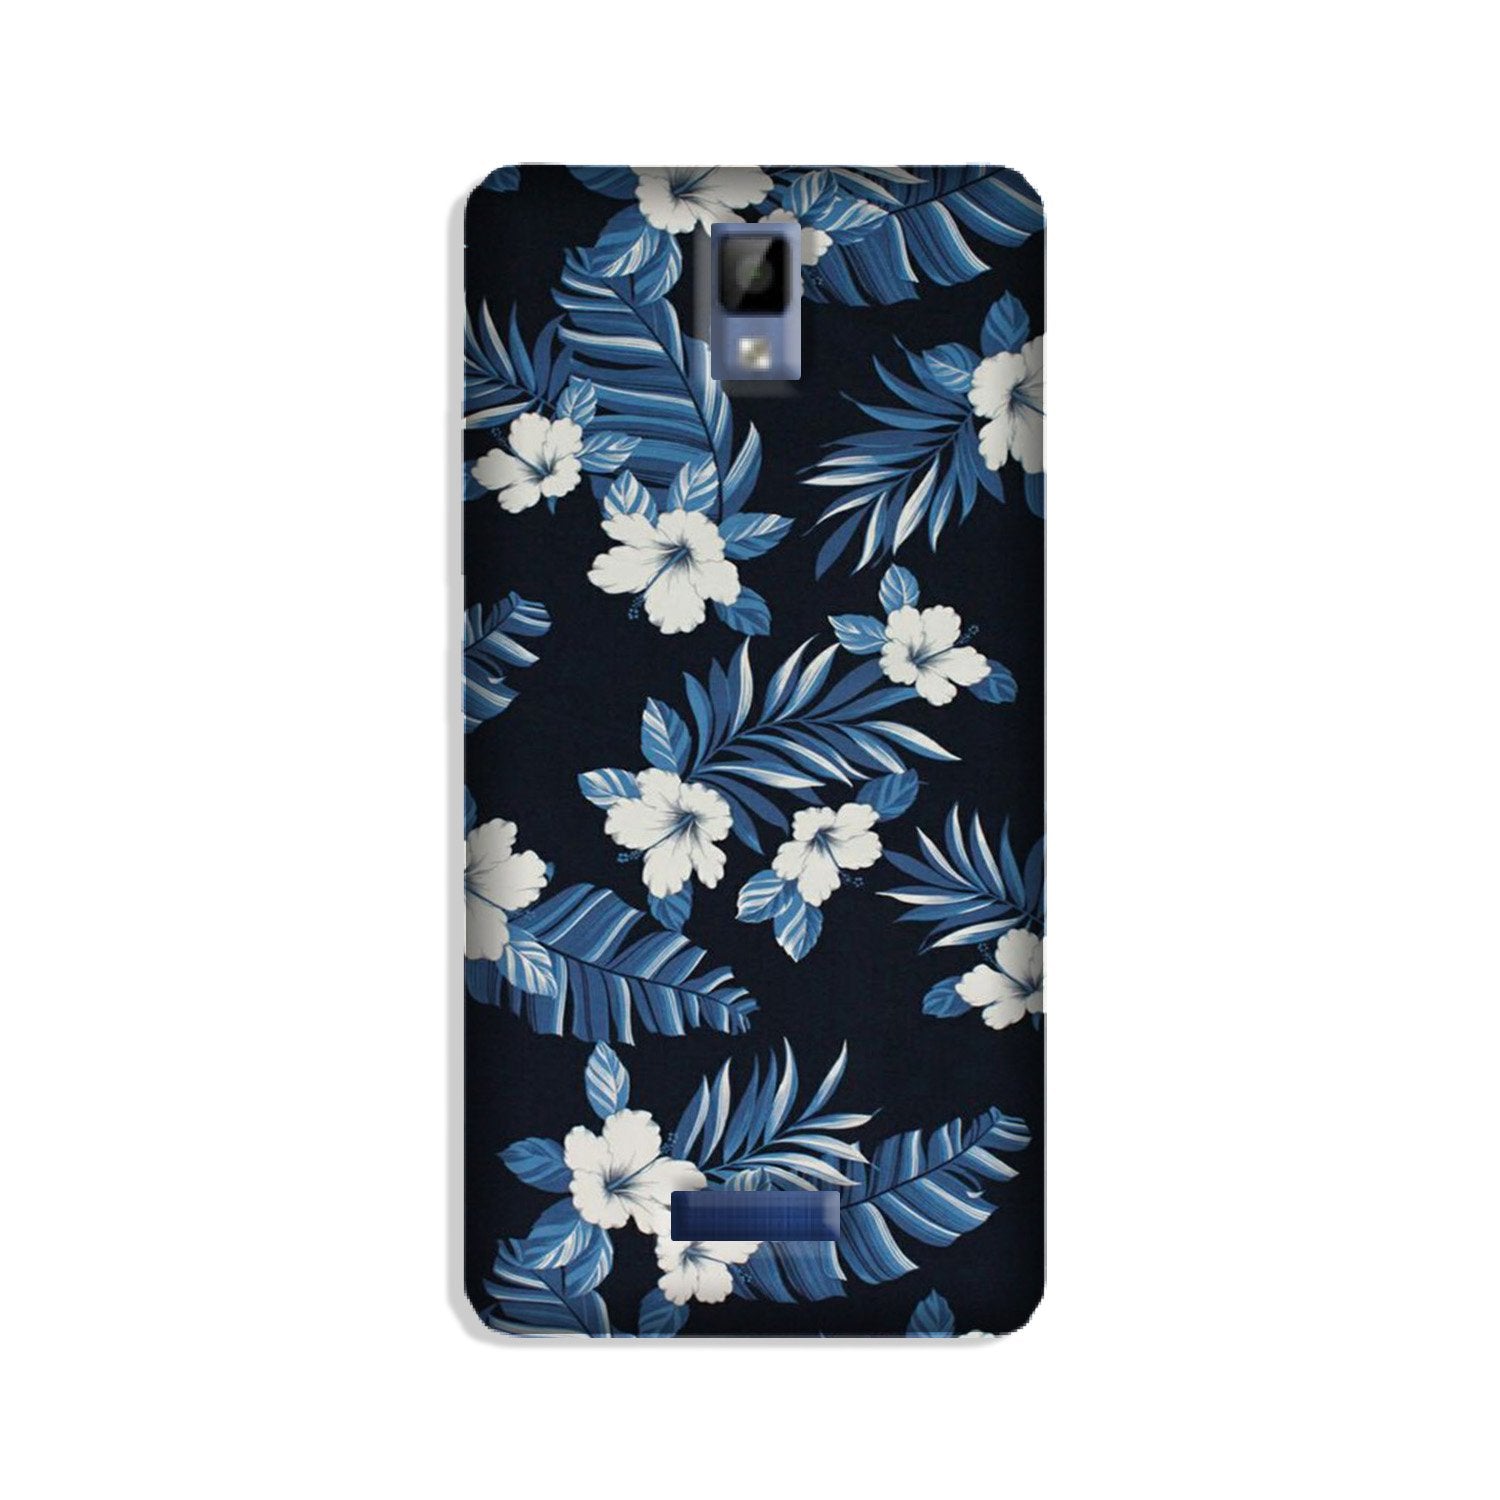 White flowers Blue Background2 Case for Gionee P7